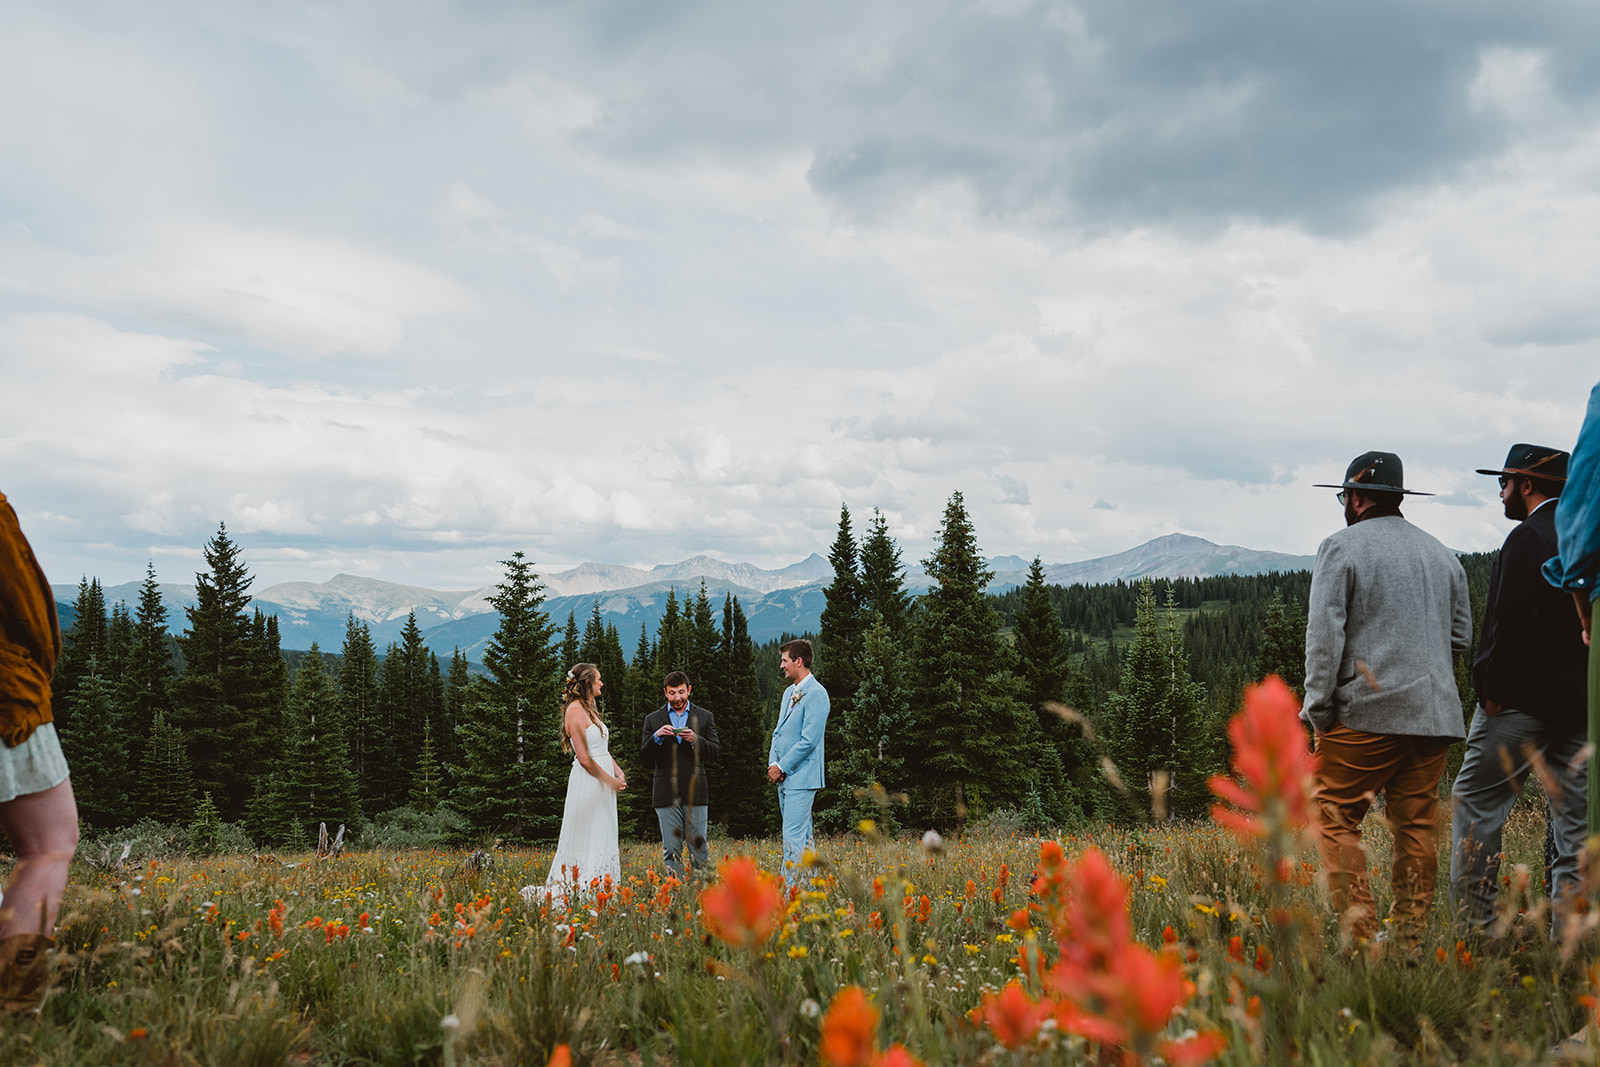 Shrine Pass Wildflower Wedding, Frisco, CO. Couple stands in wildflower field below the mountains for their ceremony.